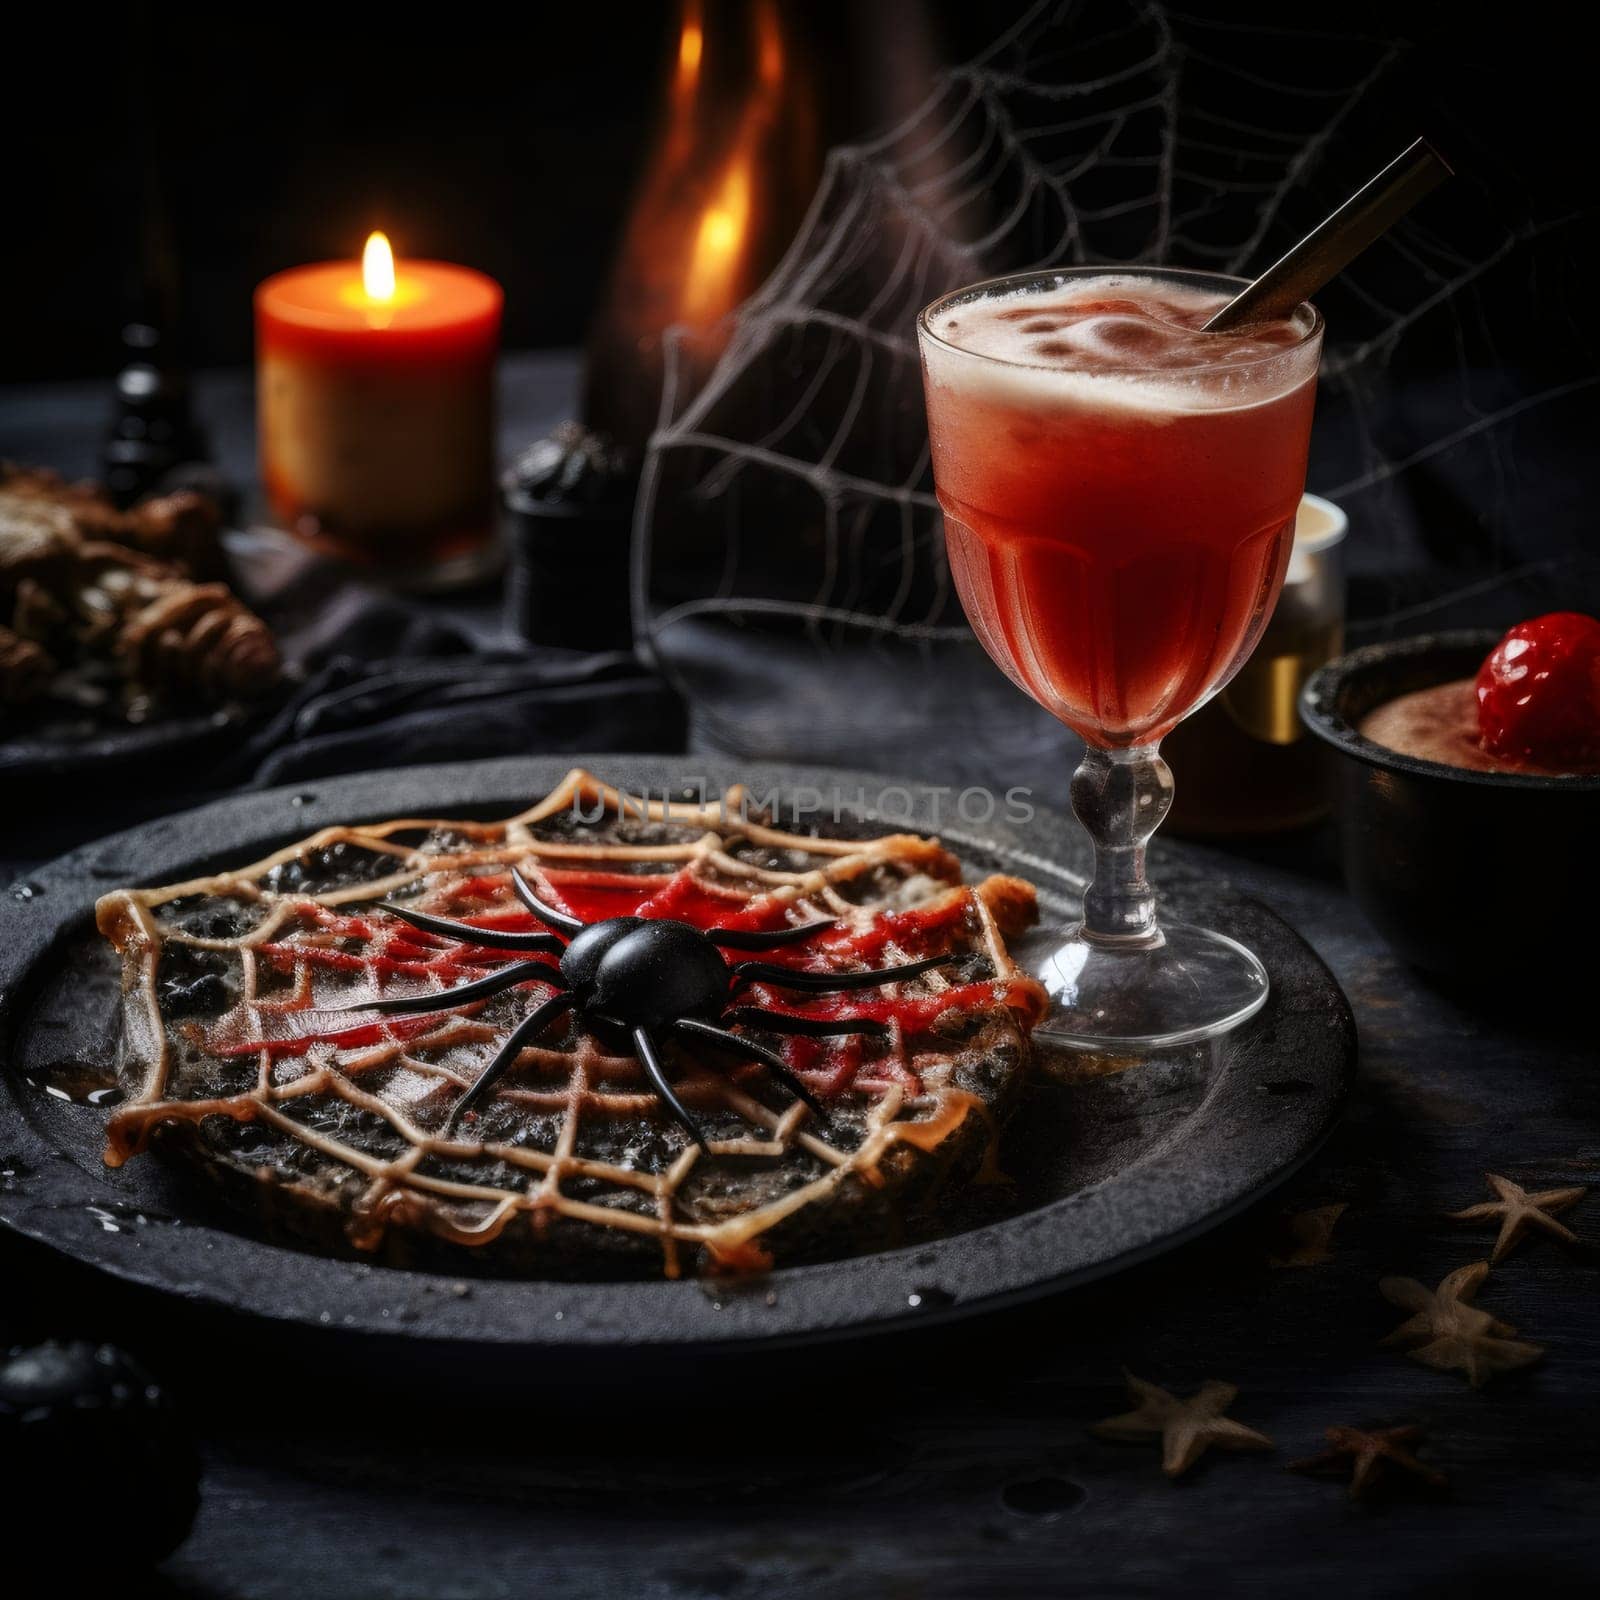 A spoiled pie with a spider and a poisonous drink on the table. by Nataliya